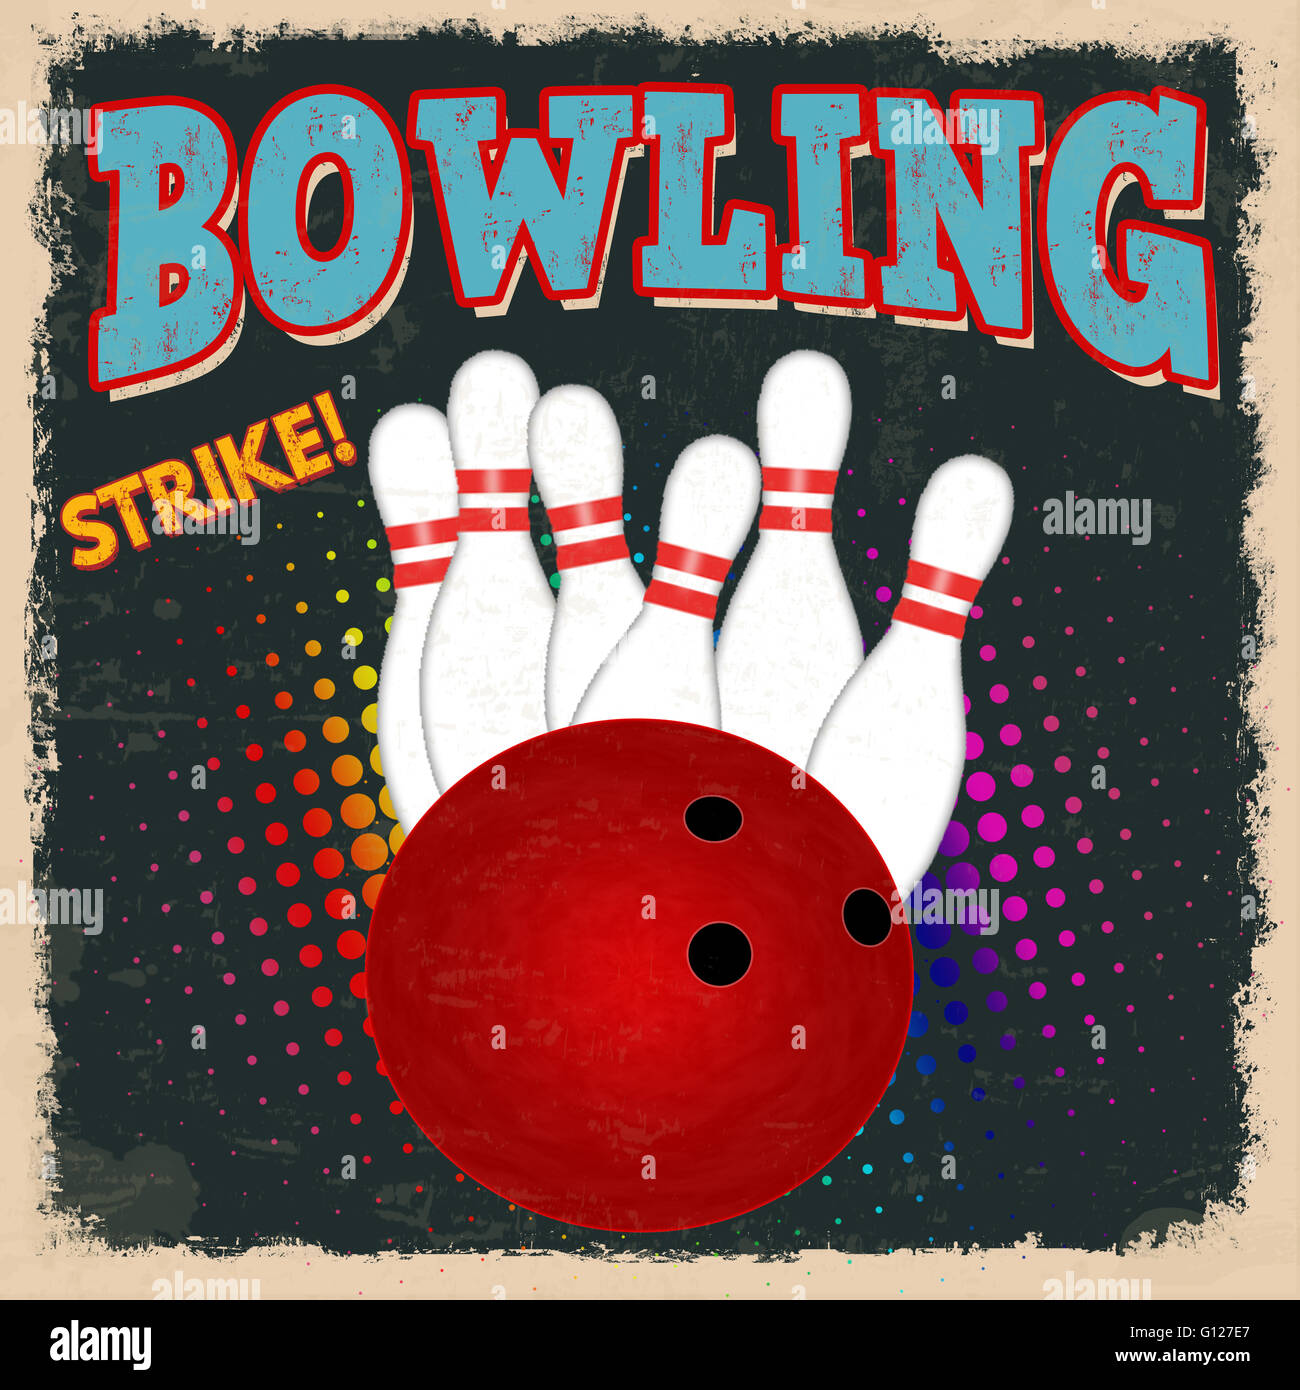 Bowling retro poster design template on dark background, vector ...